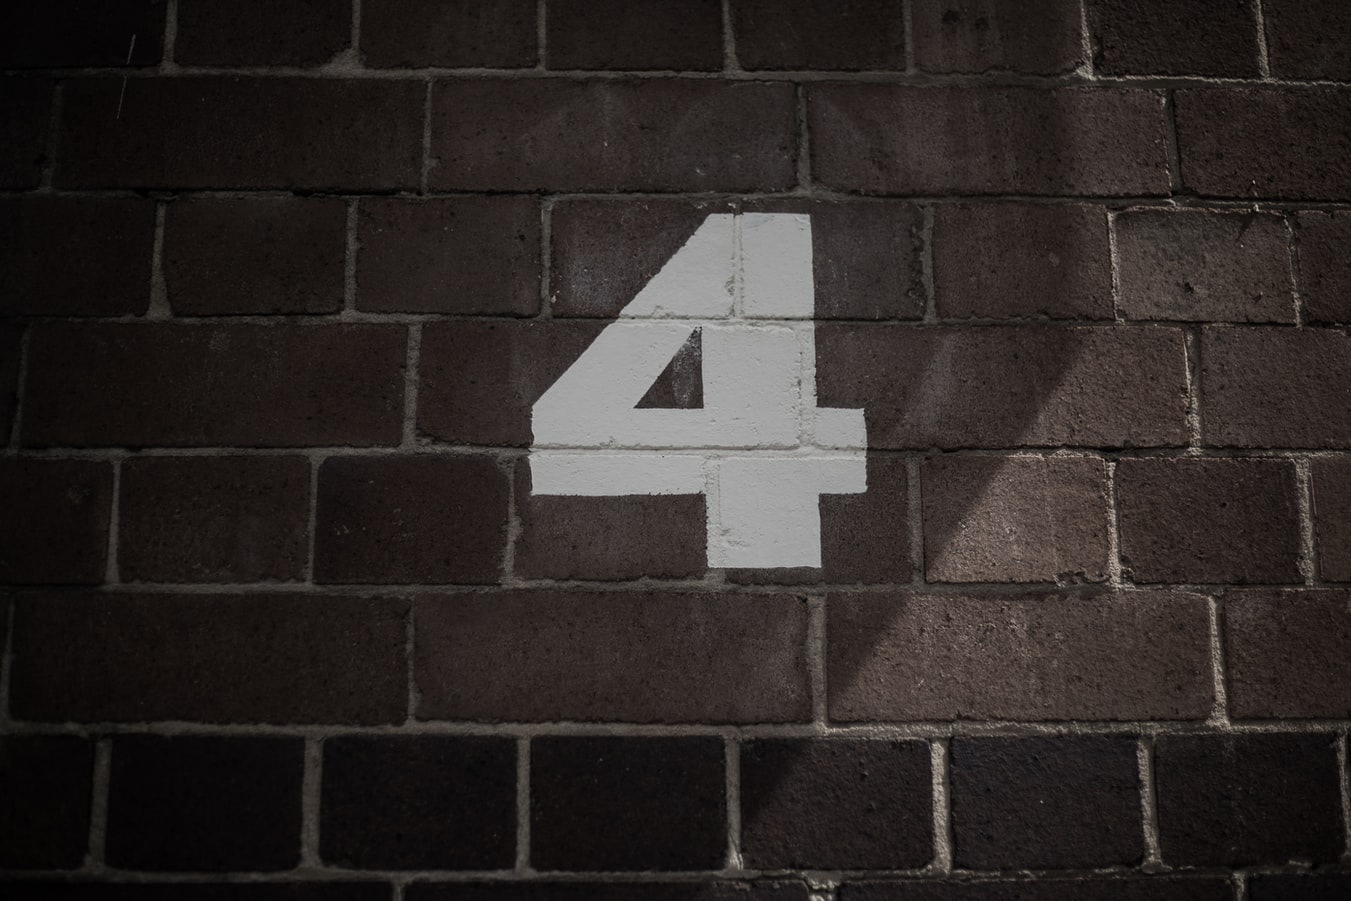 The number four is painted on the brick wall